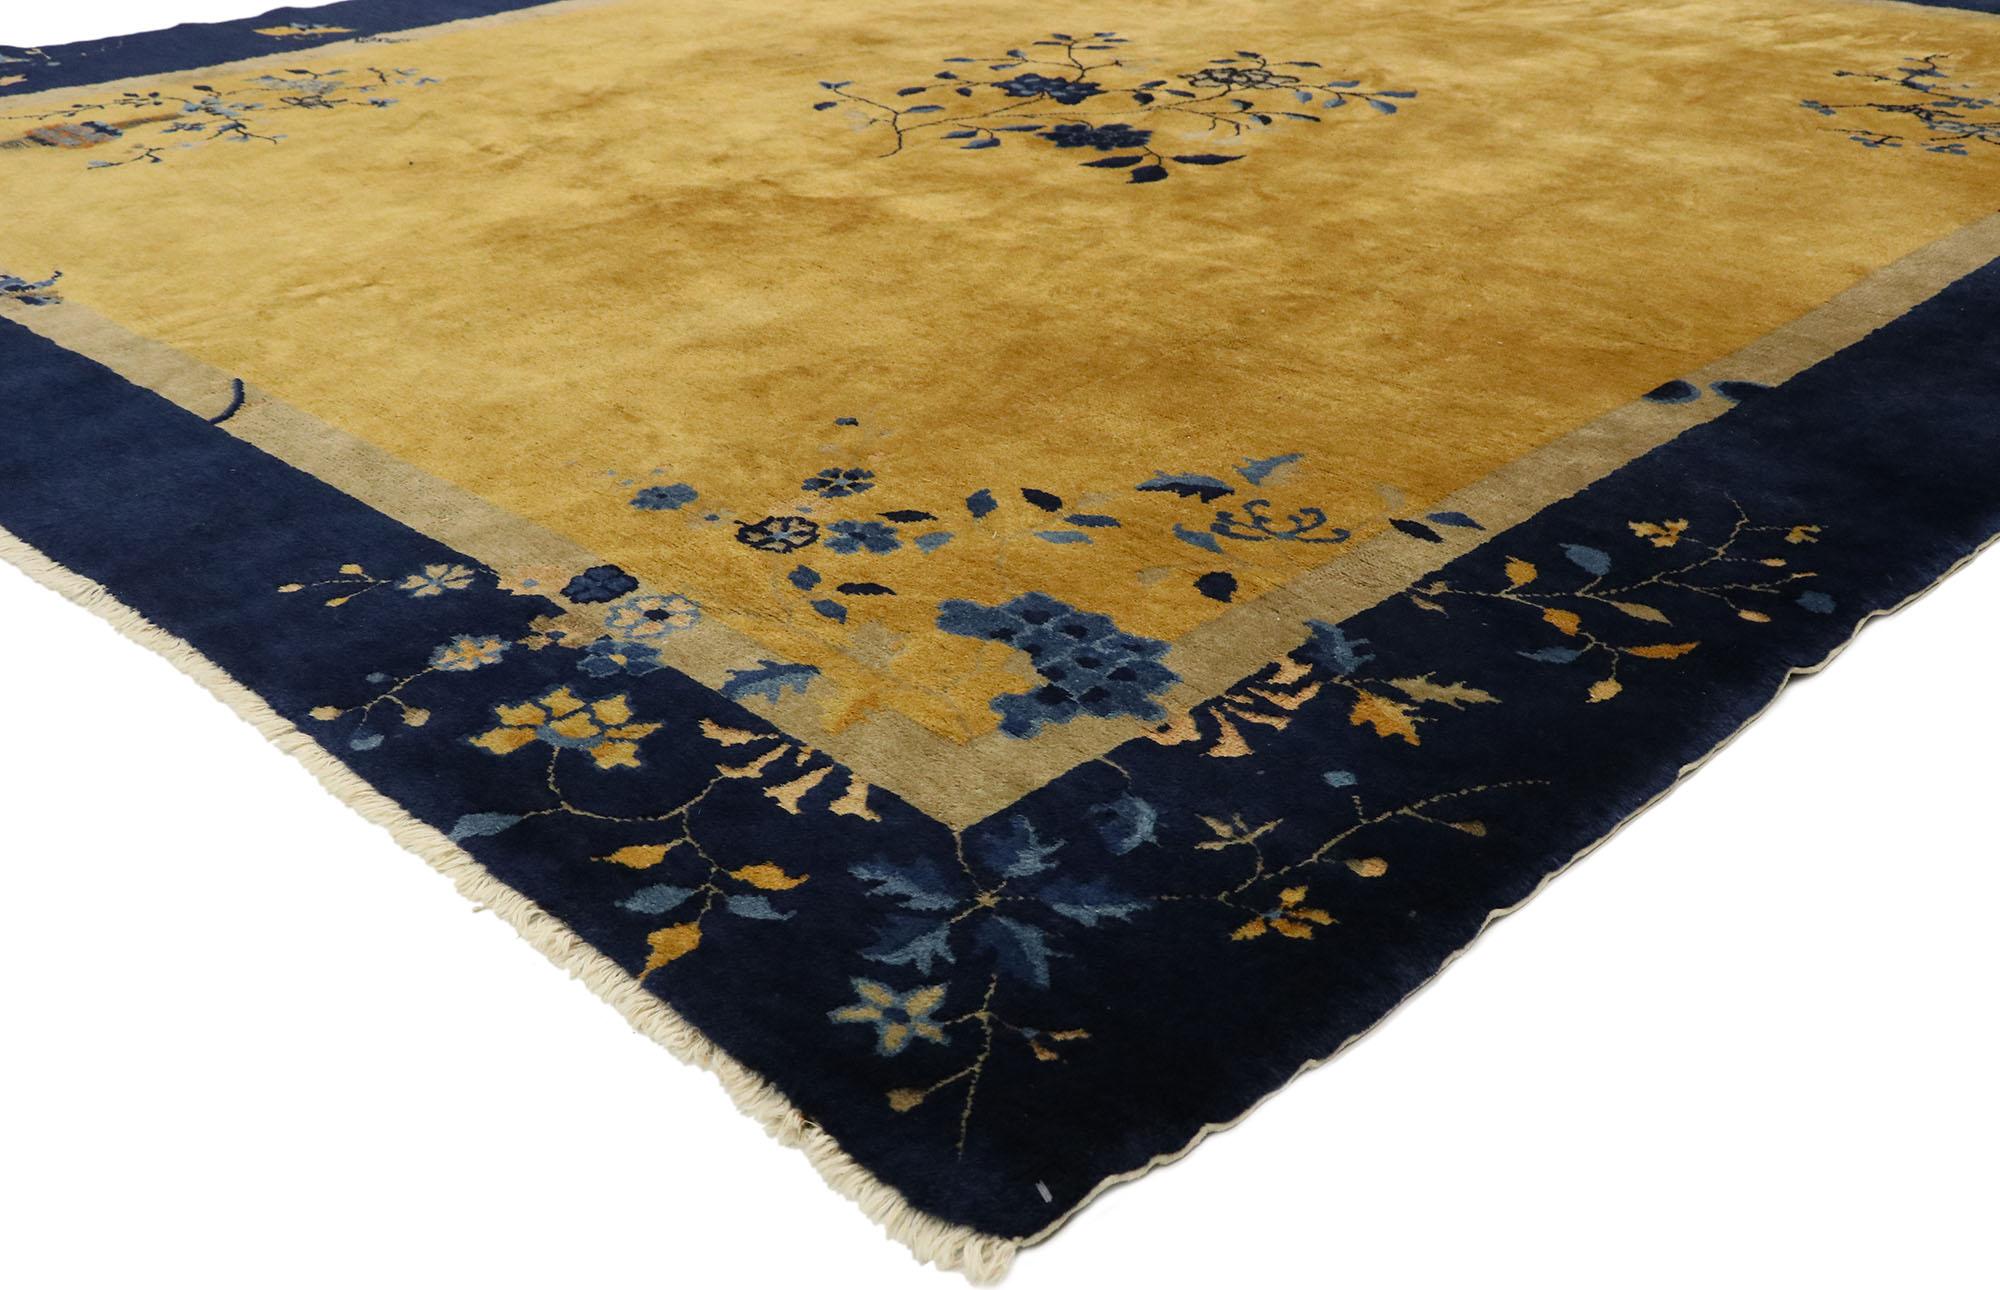 77453, antique Chinese Art Deco rug with chinoiserie style? This hand knotted wool antique Chinese Art Deco rug features a color-blocked field and border scheme festooned with delicate sprays of flowers. In the center, an intricate floral bouquet is